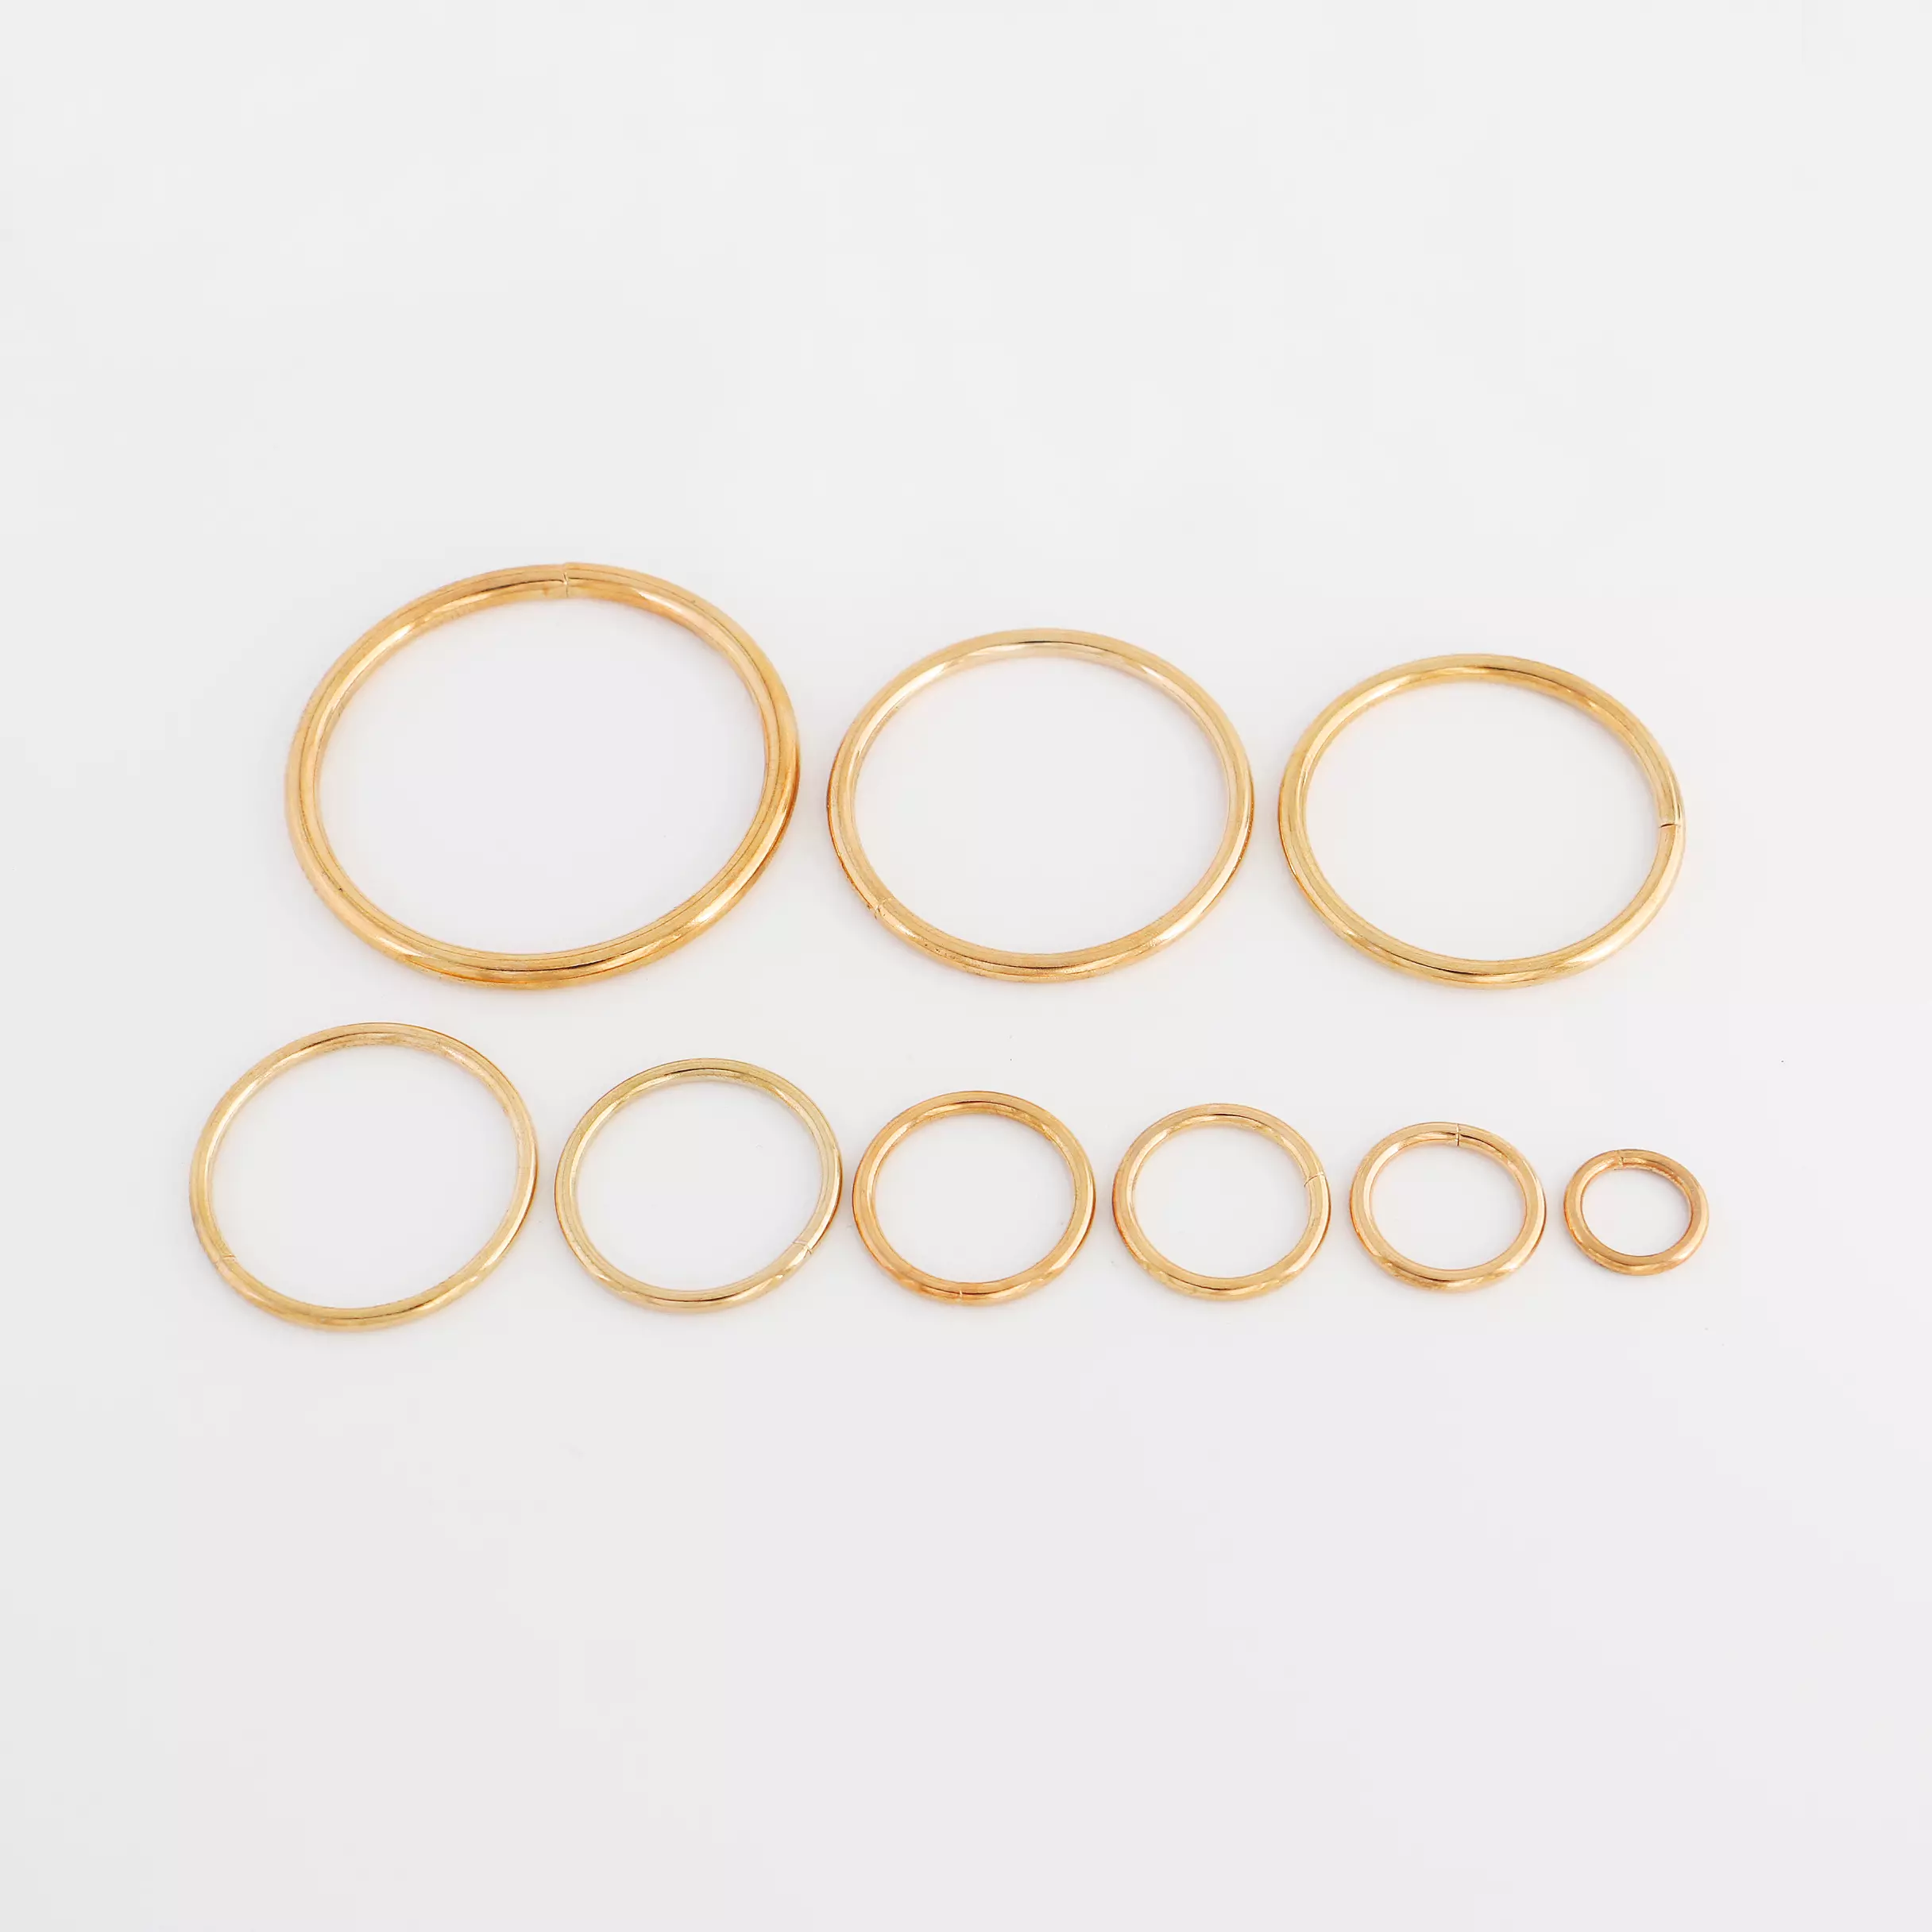 Metal O Rings, 8 Pack 30mm(1.18 inch) ID 3mm Thickness Multi-Purpose Non Welded O-Ring Buckle, Gold Tone, Size: Small